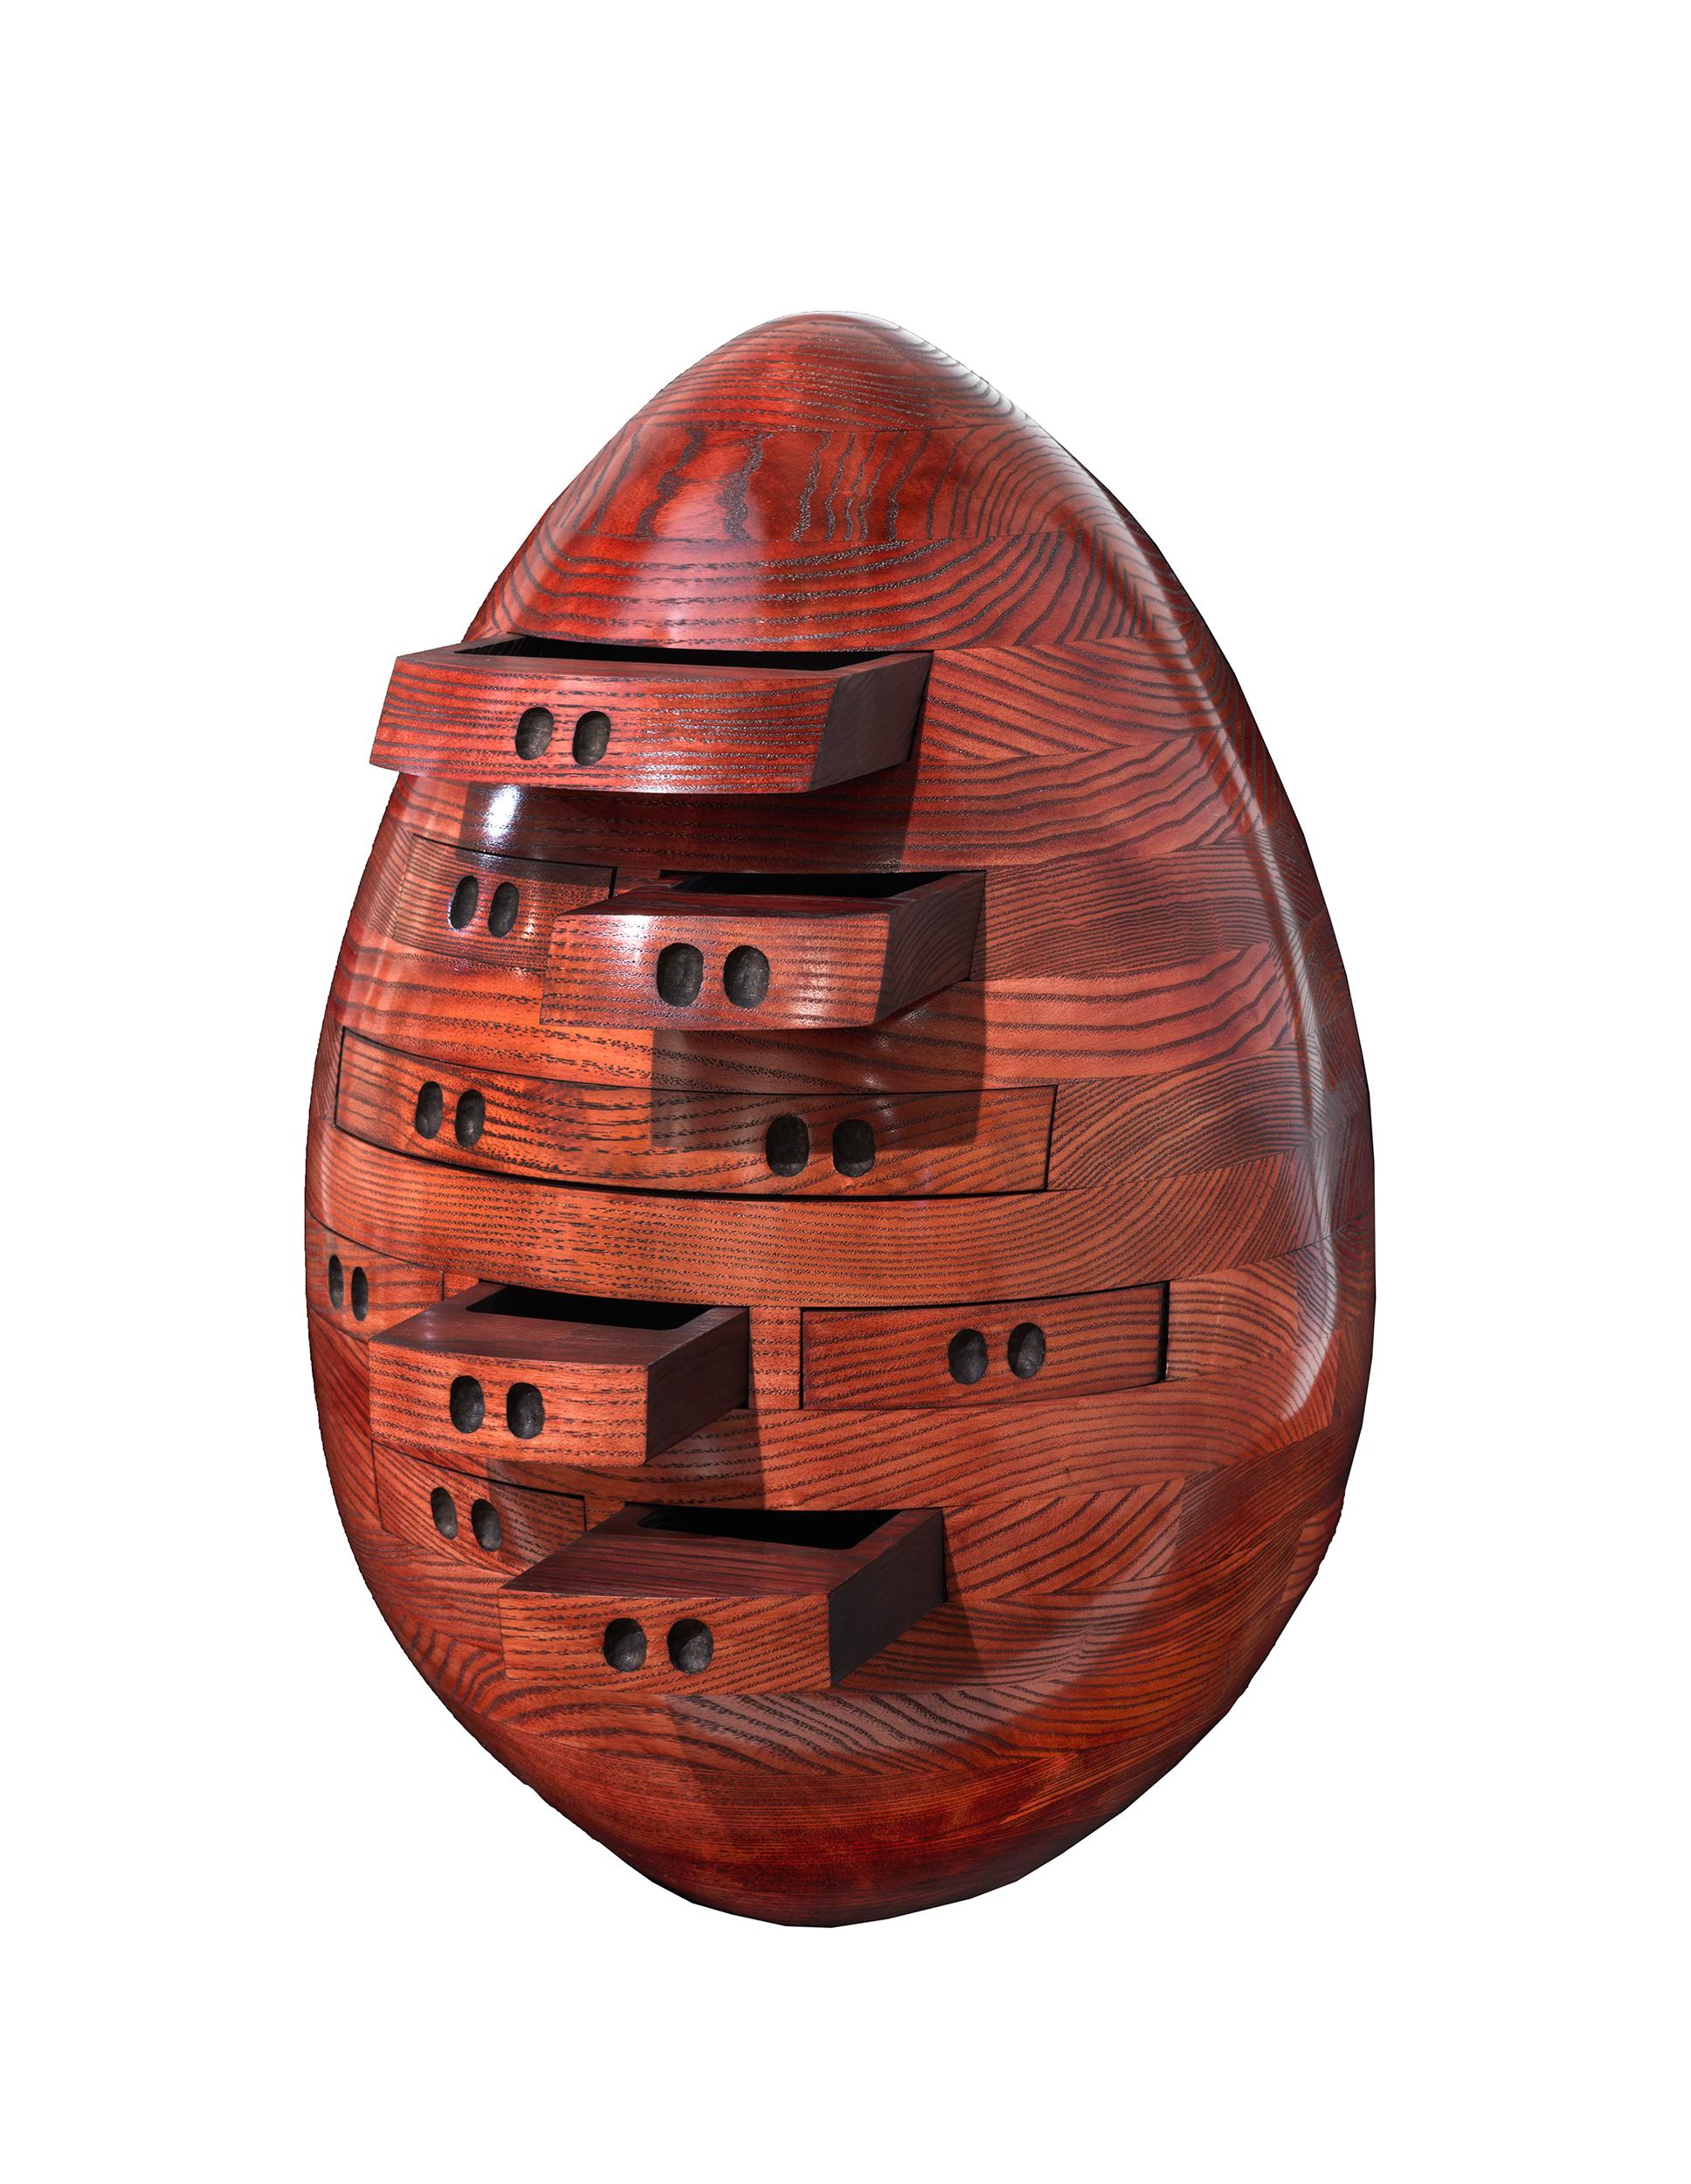 Egg in Red - Multi-drawer Chest Sculpture in Hand Carved Wood (Nine Drawers) - Brown Still-Life Sculpture by Steve Turner